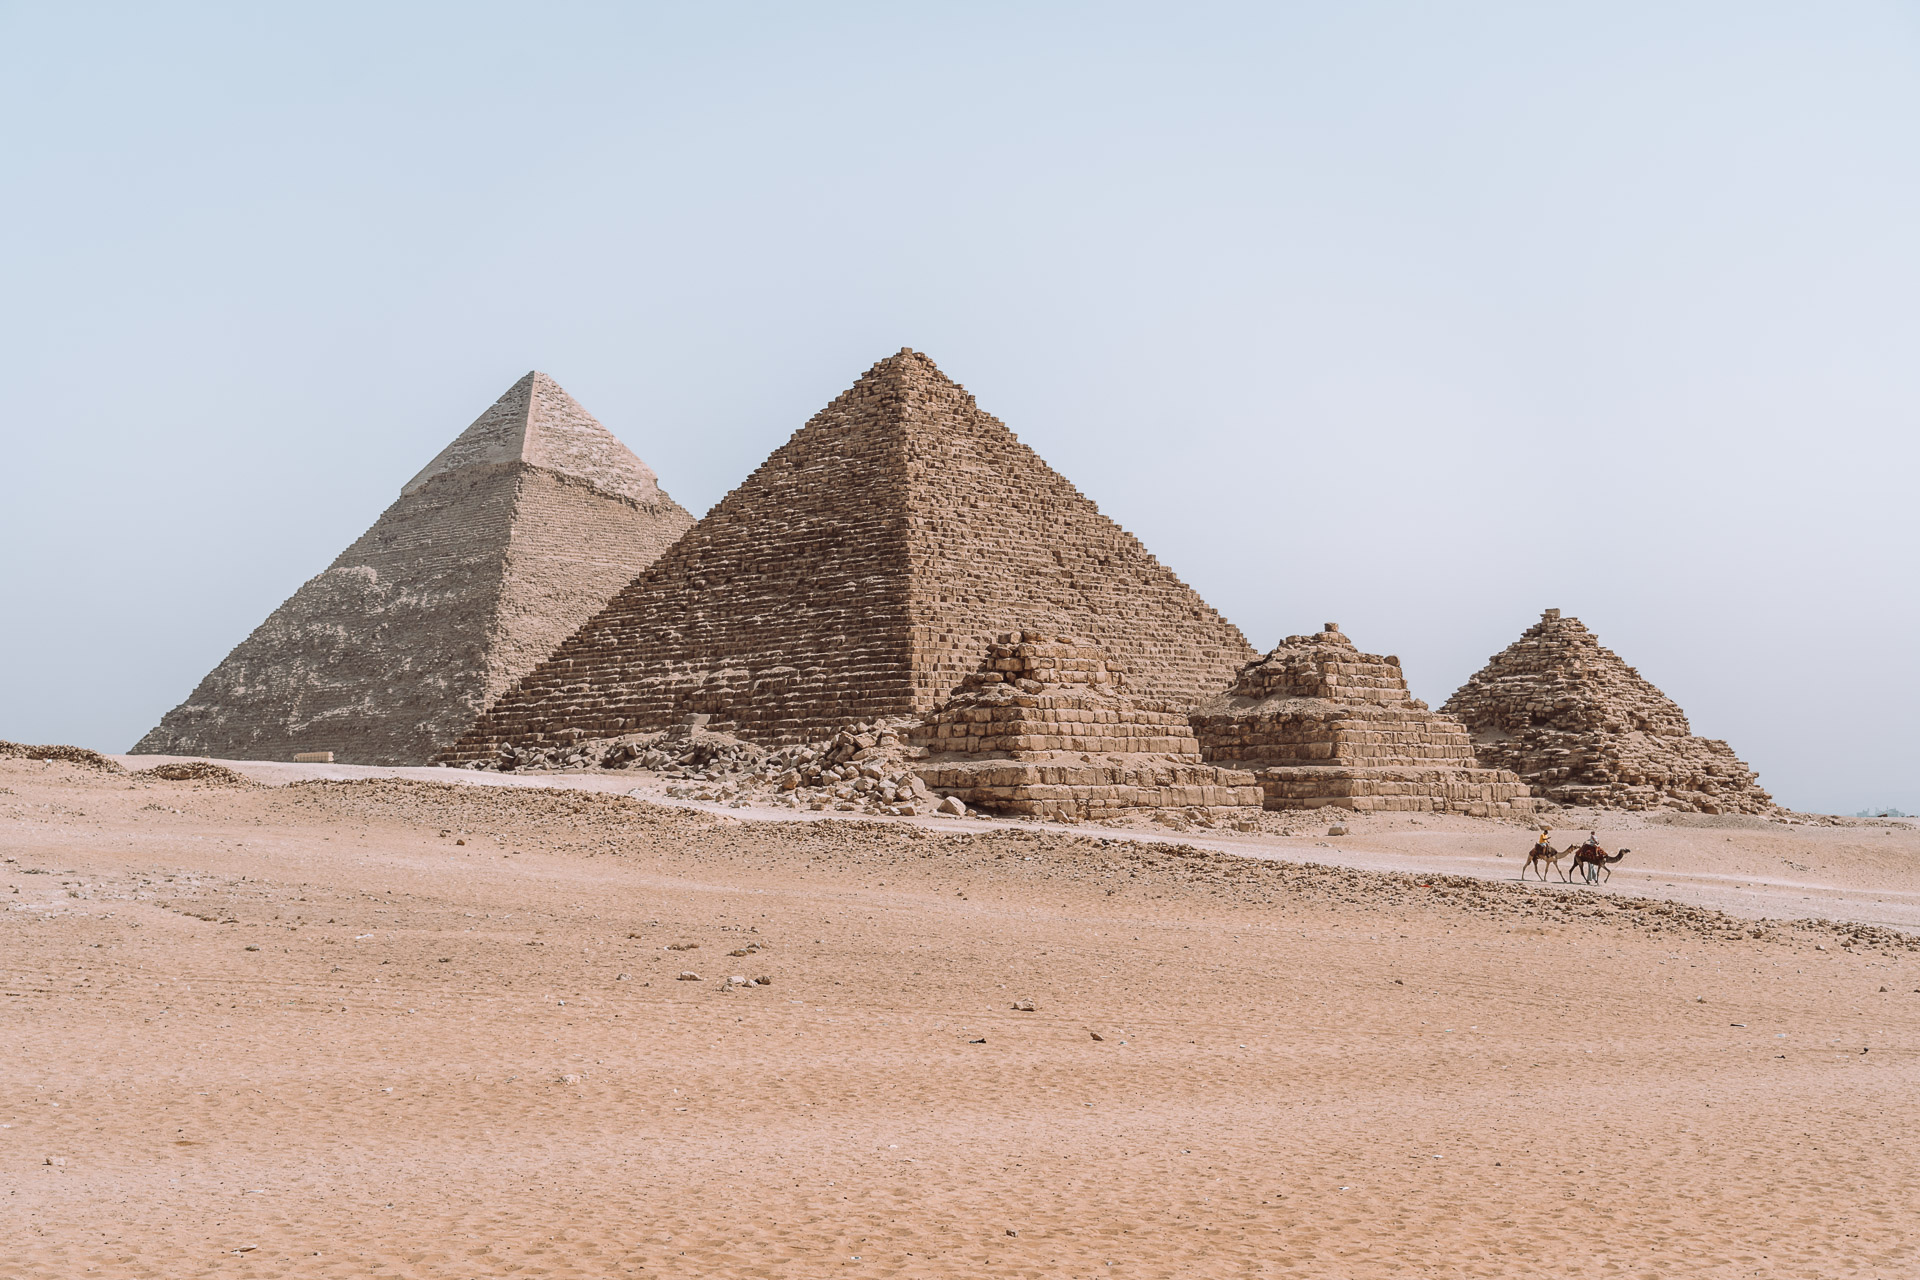 Visit The Pyramids of Giza without a guide + the 5 best viewpoints